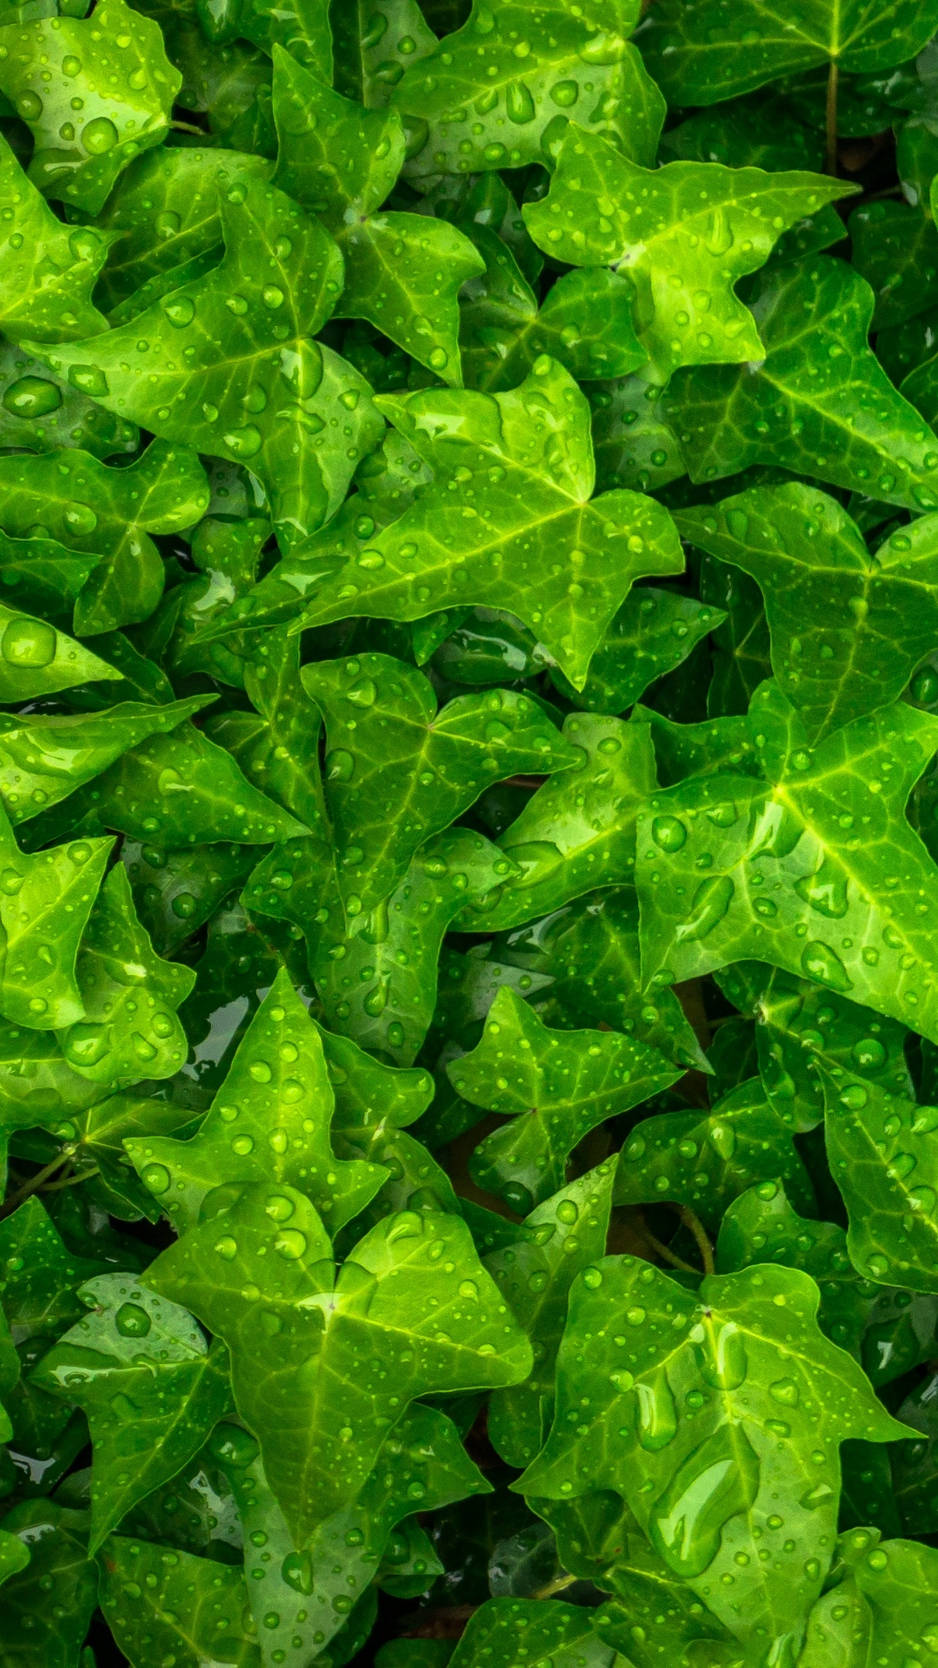 Wet Plant Leaves top View IPhone Wallpaper